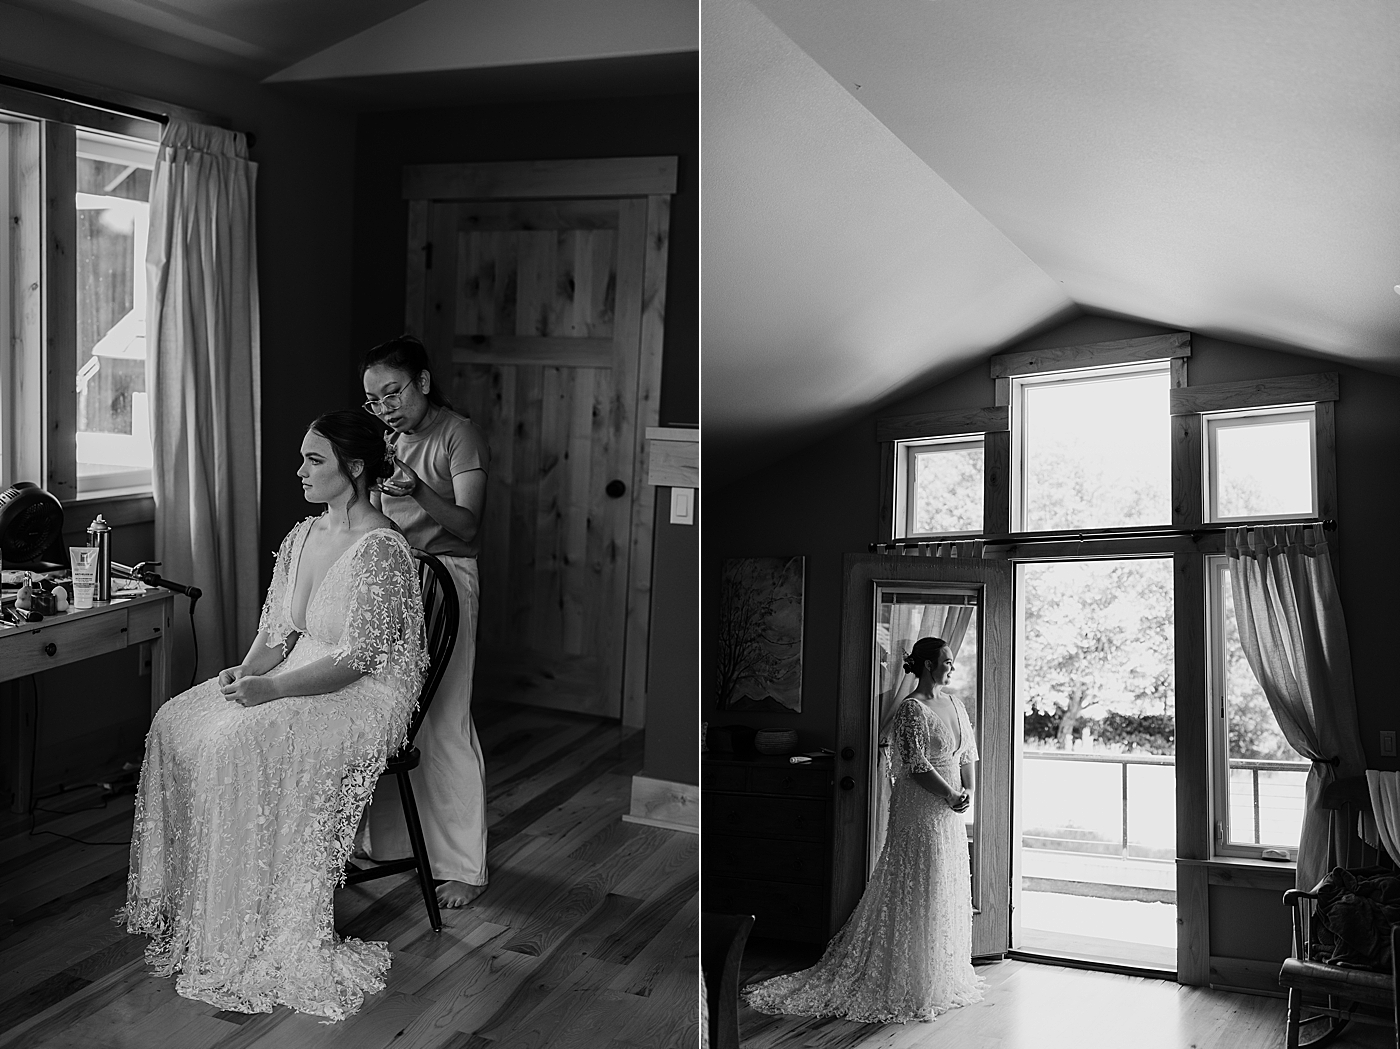 Bride getting ready in AirBnB before eloping. Photo by Megan Montalvo Photography.